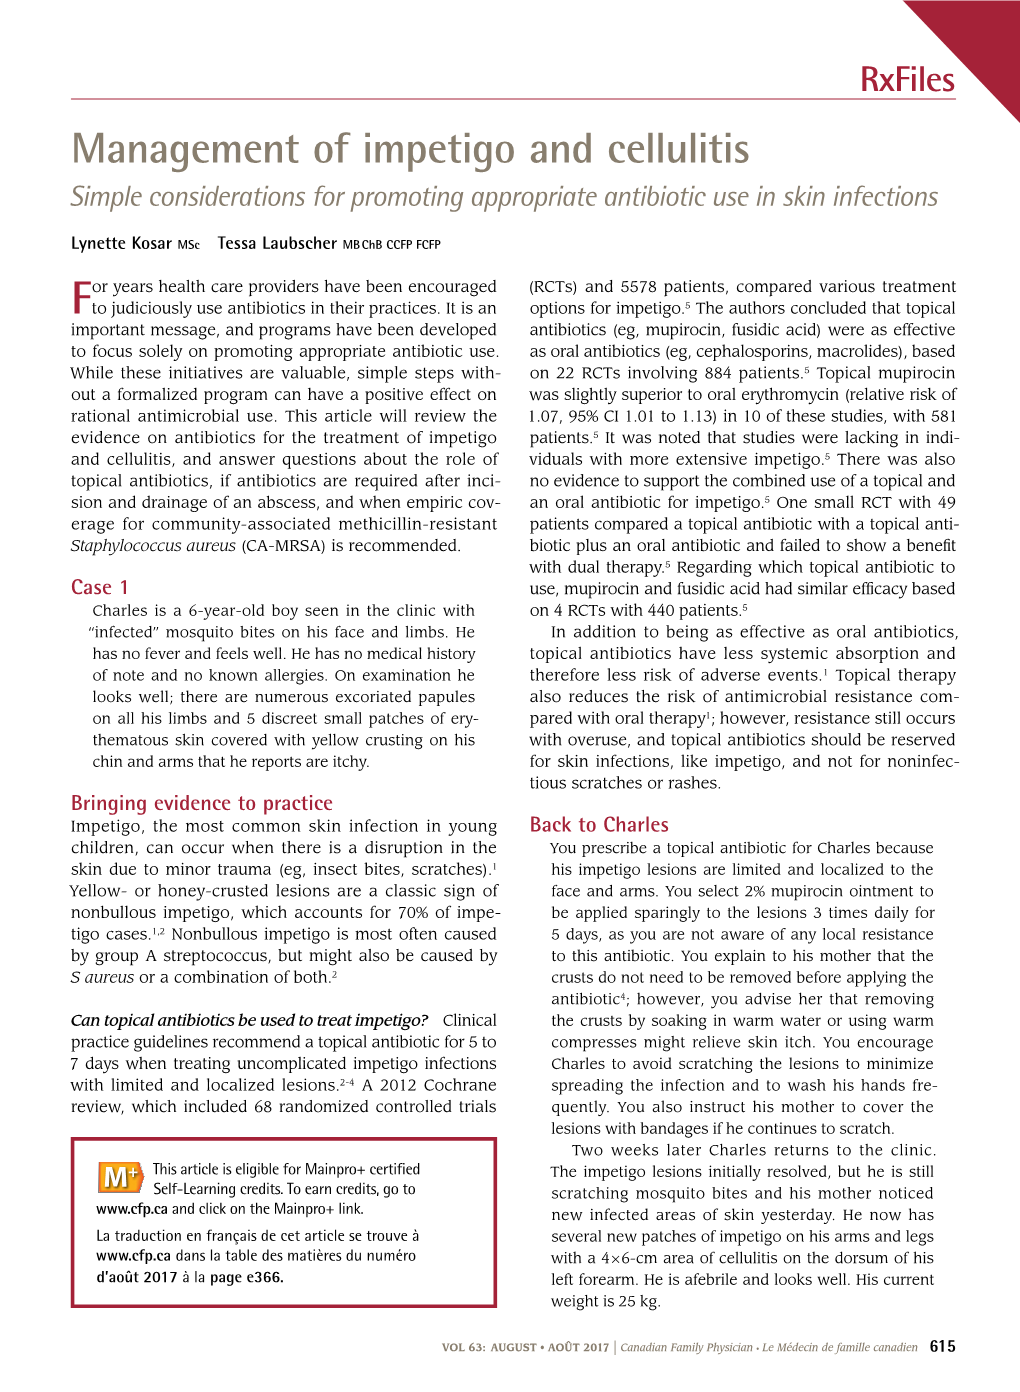 Management of Impetigo and Cellulitis Simple Considerations for Promoting Appropriate Antibiotic Use in Skin Infections